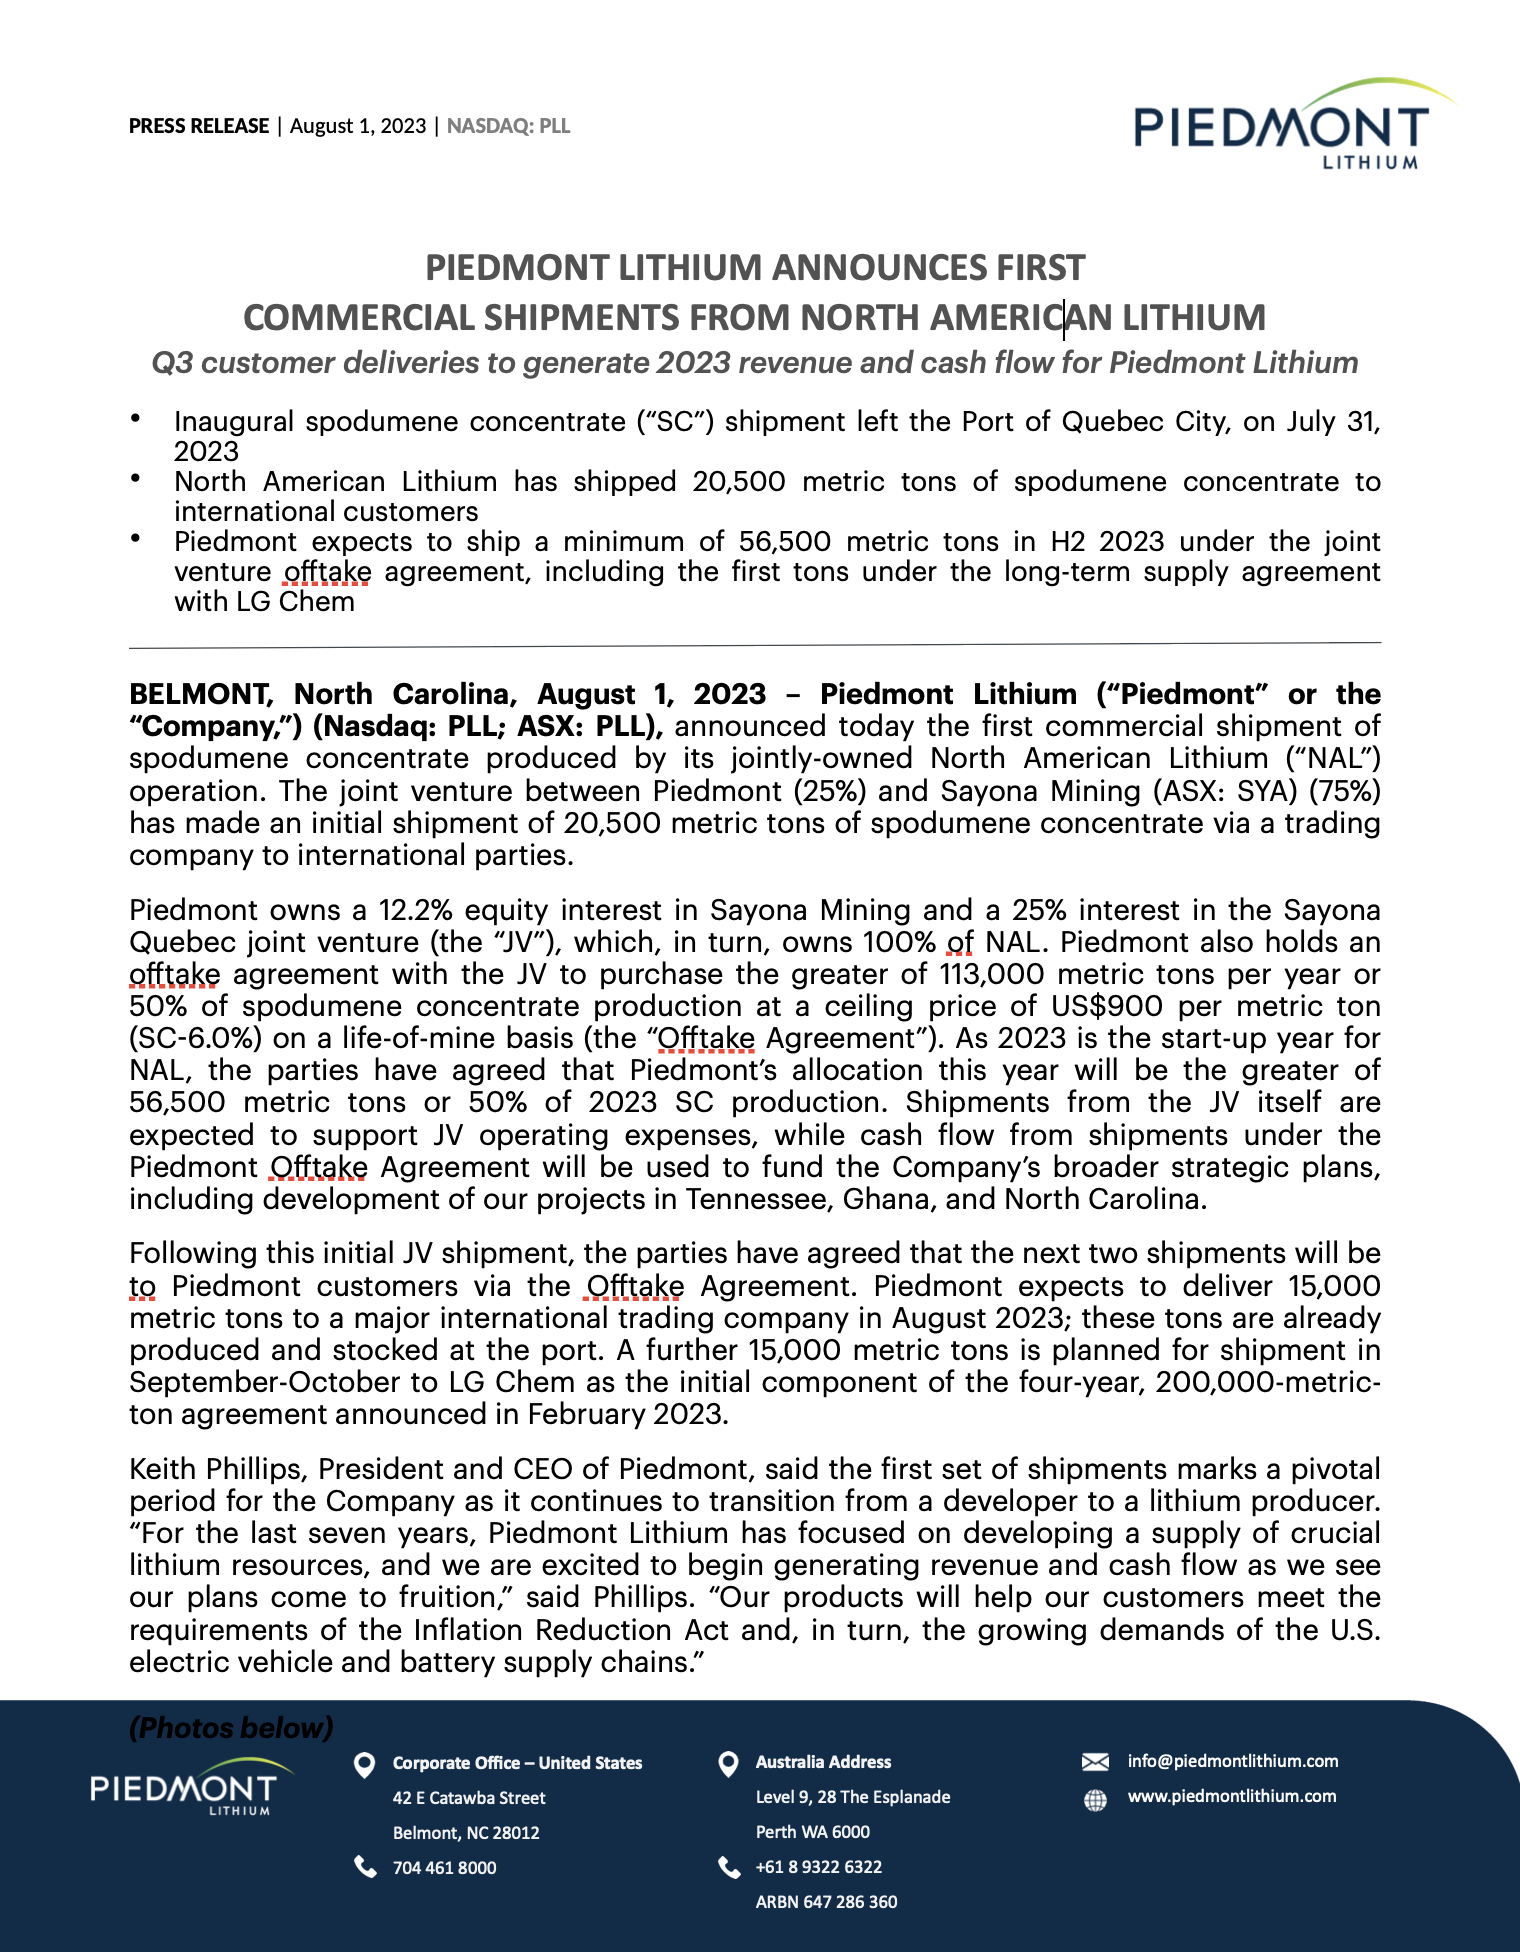 cover page for PIEDMONT LITHIUM ANNOUNCES FIRST COMMERCIAL SHIPMENTS FROM NORTH AMERICAN LITHIUM